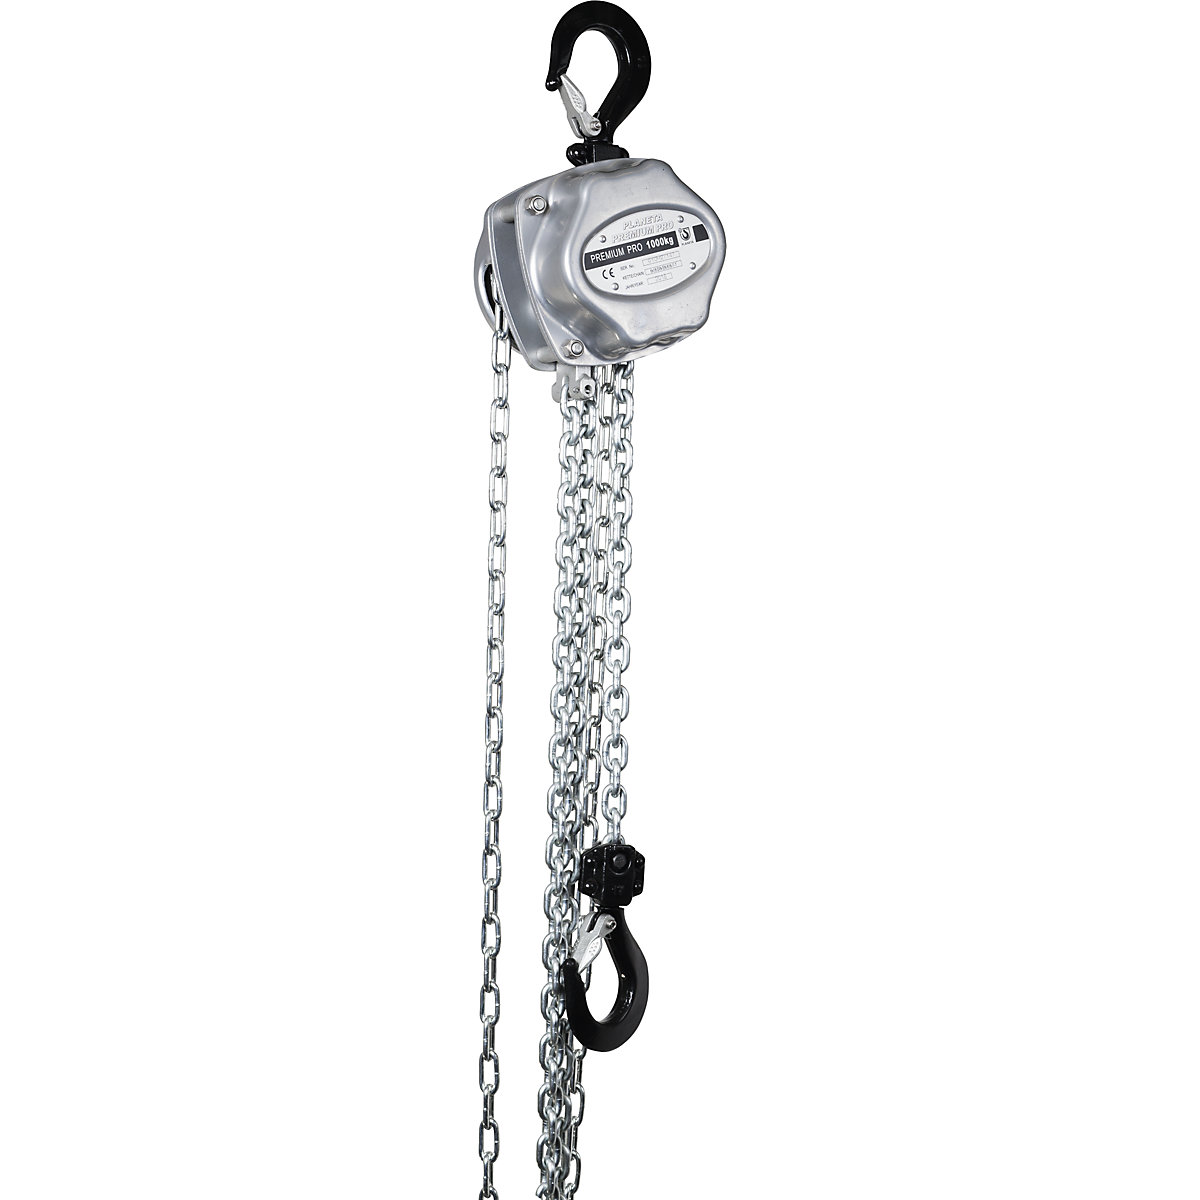 Premium PRO spur gear block and tackle, standard lifting height 3 m, max. load 1000 kg-5